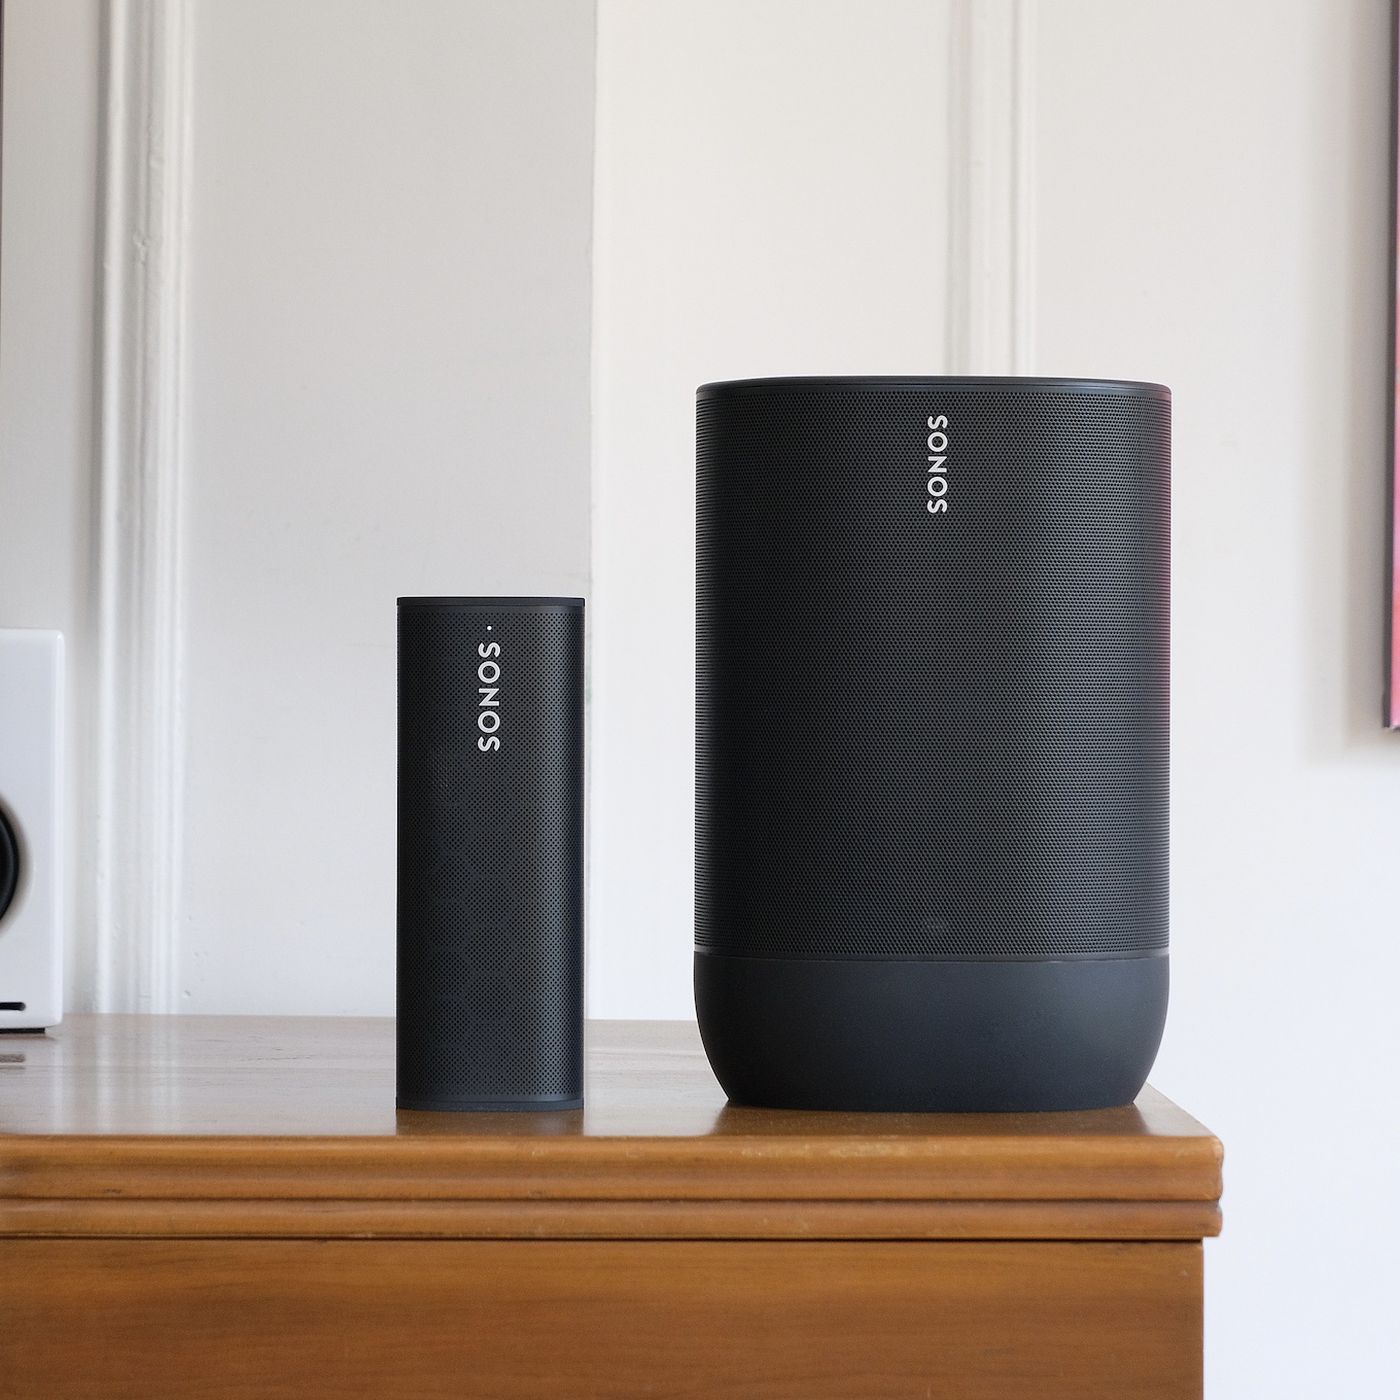 The best Sonos speakers to buy right now - The